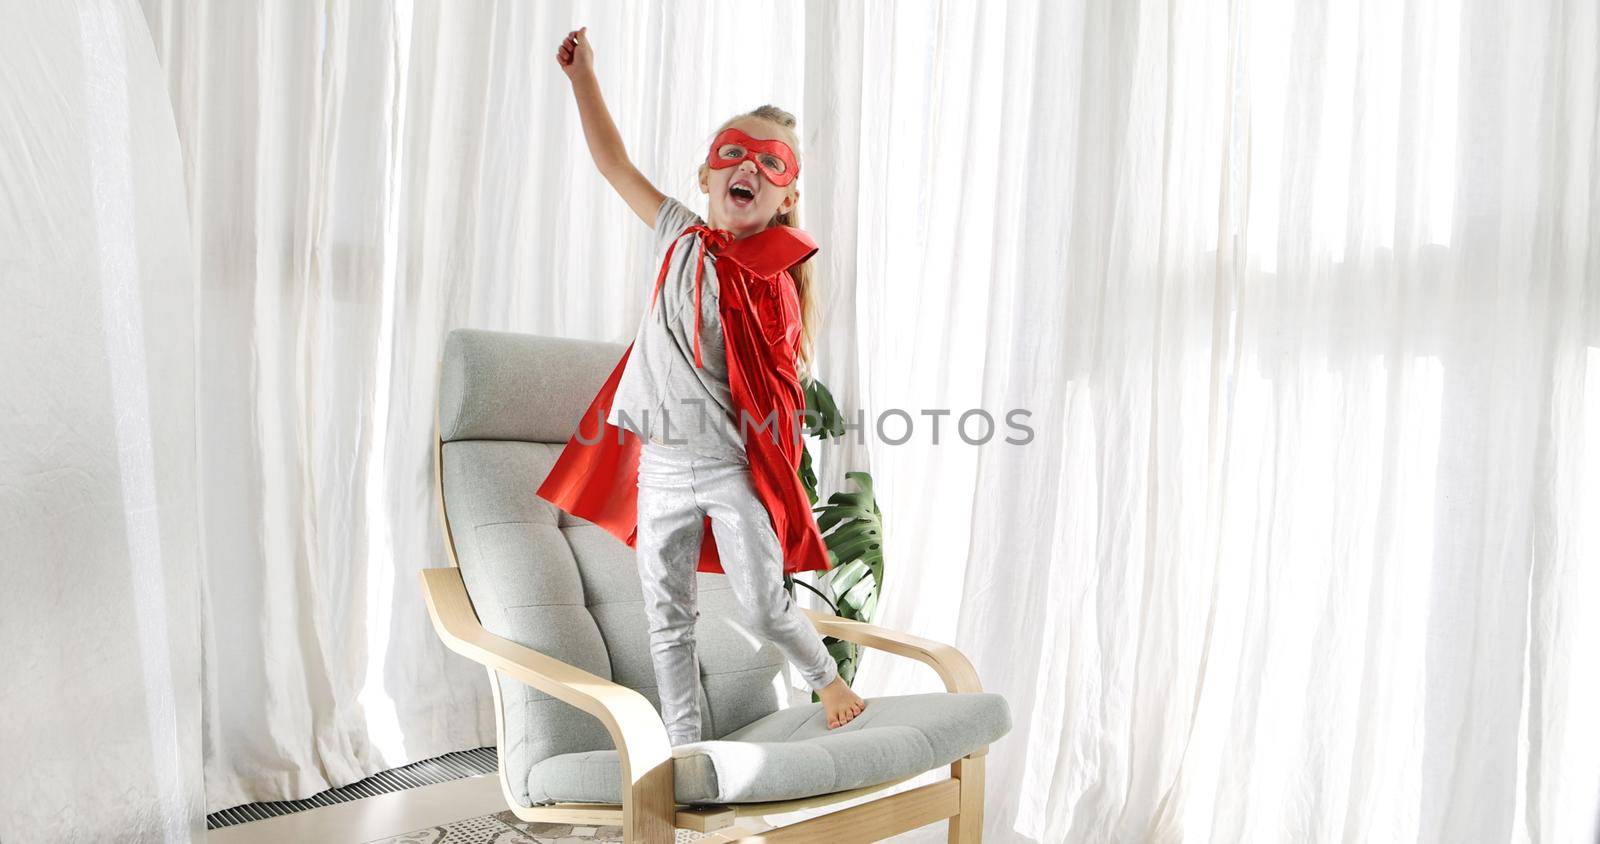 Little girl in superhero costume with mask playing in living room by Demkat